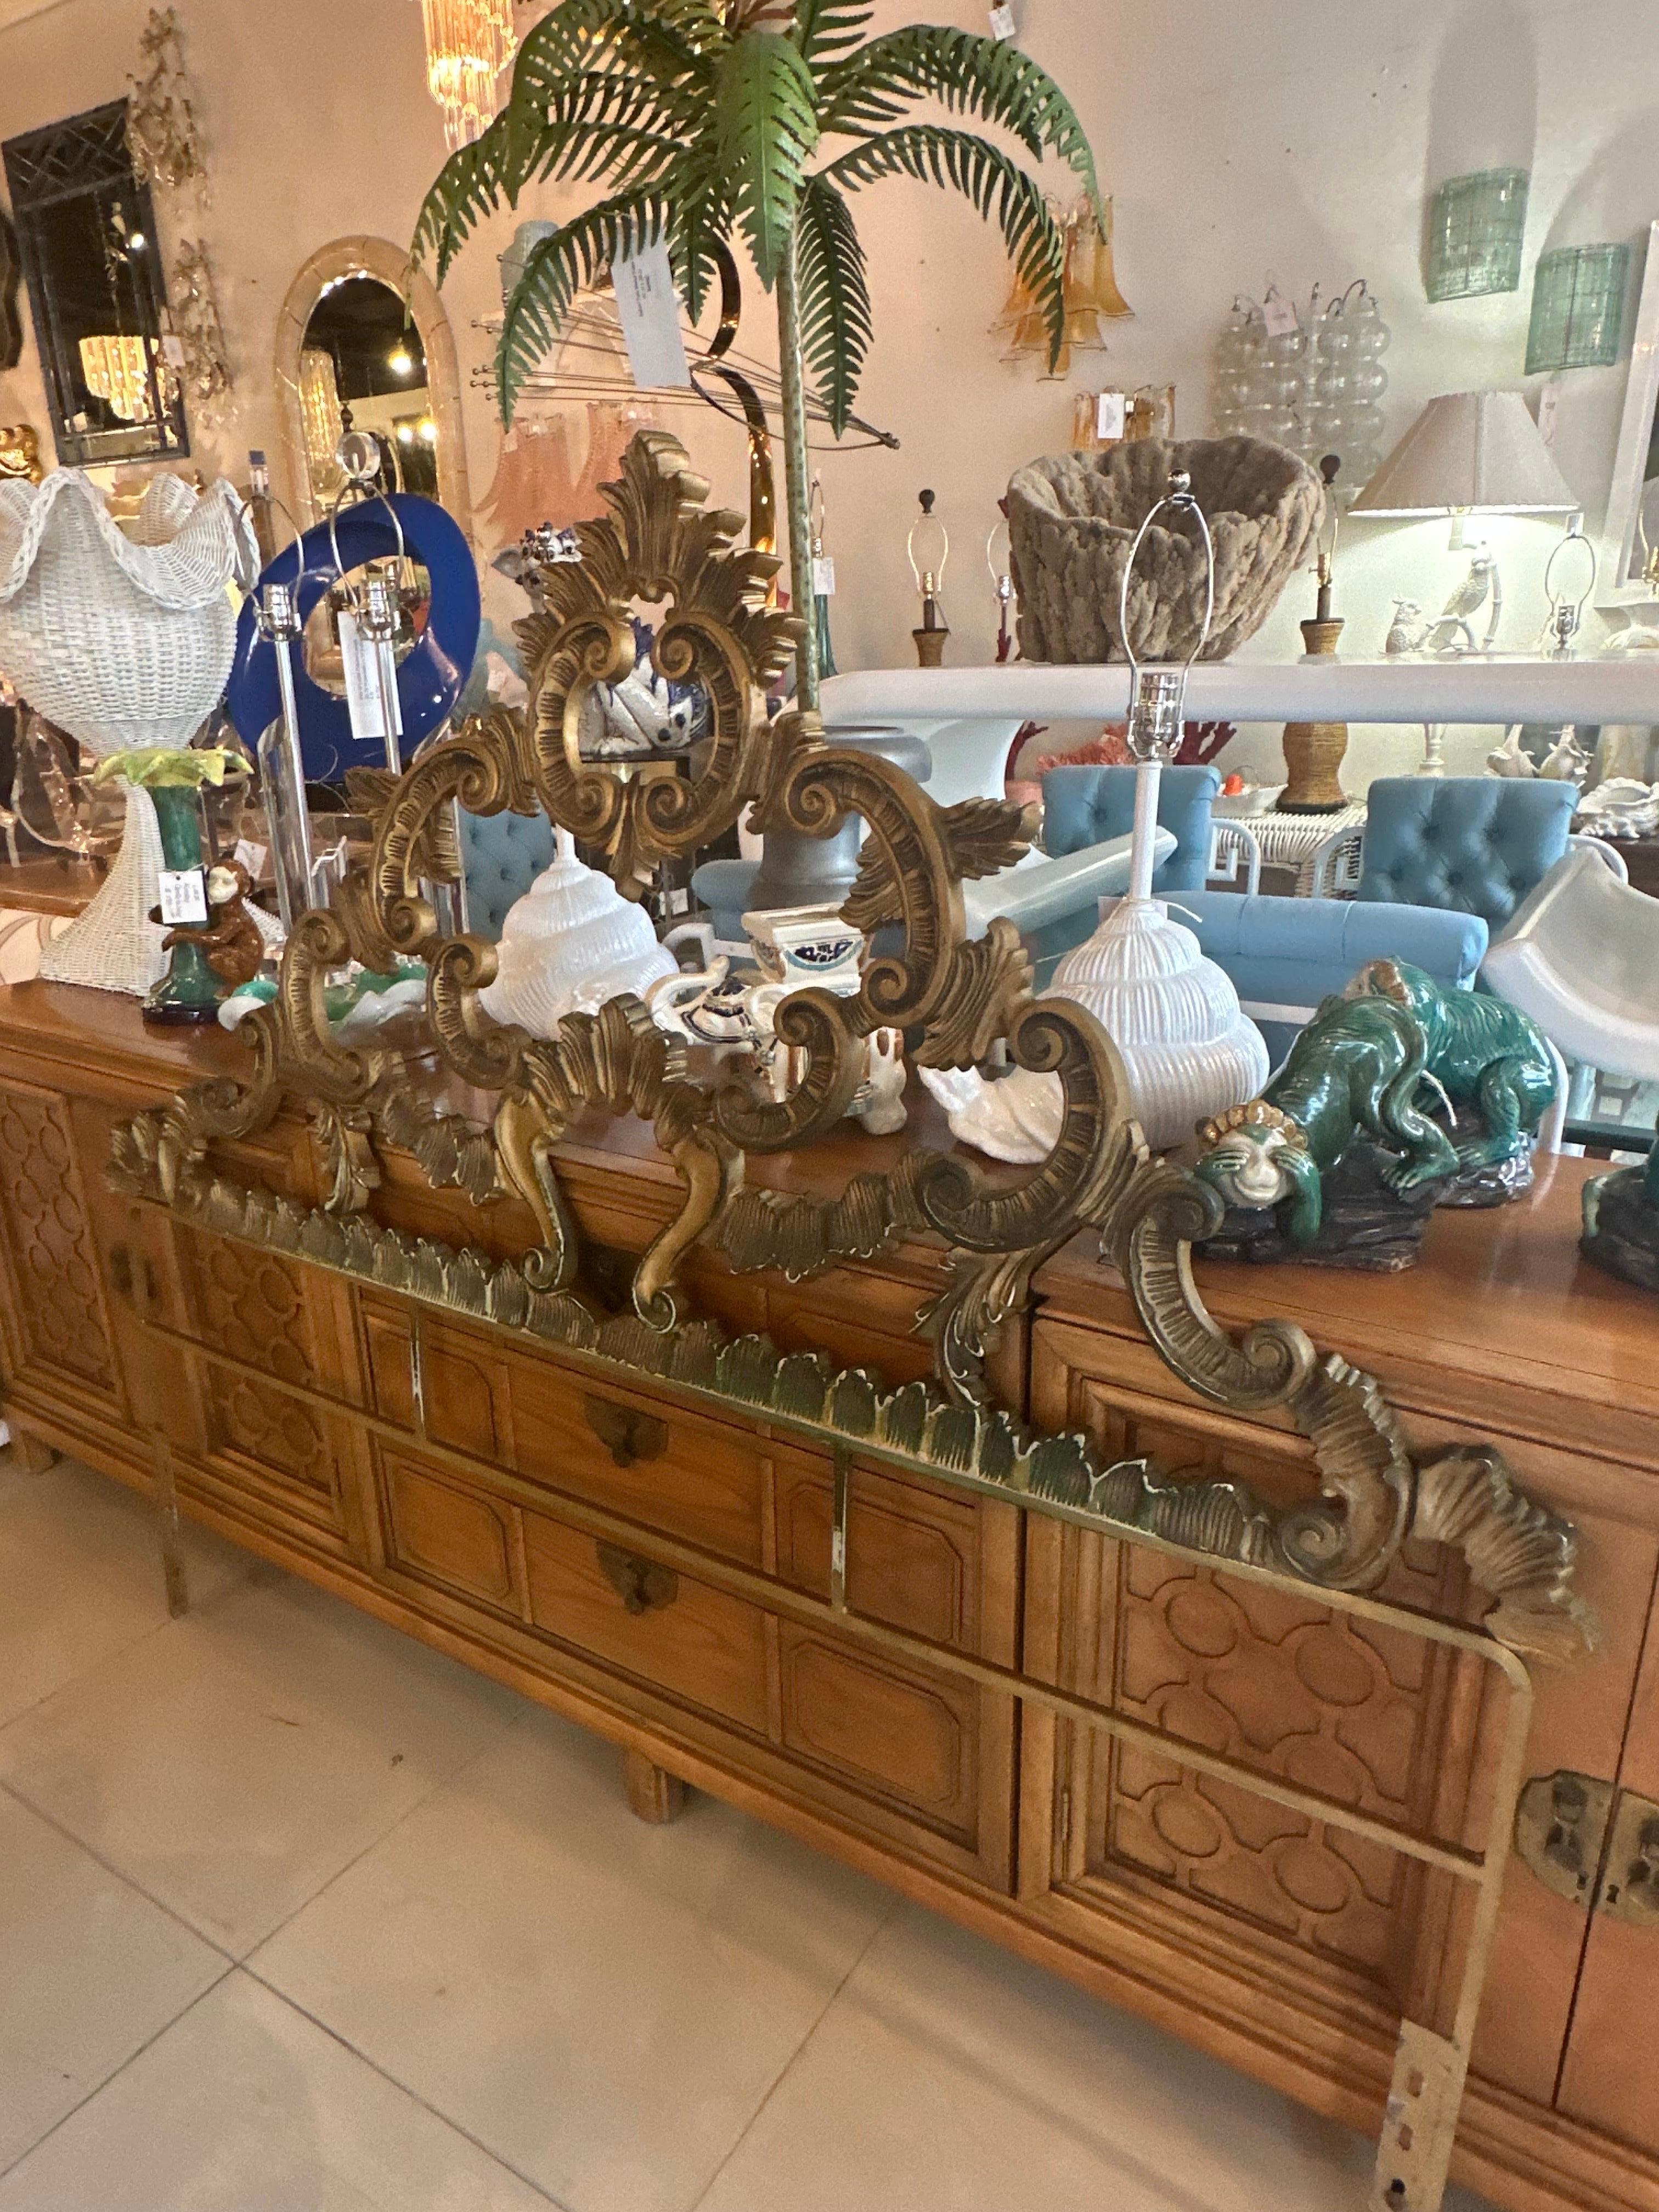 Lovely vintage French ornate metal full size headboard bed. Original gold painted finish has wear. Please see pics. This can be left as is or lacquered/painted in a color. Dimensions: 62.5 W x 54.5 H x 2 D. 